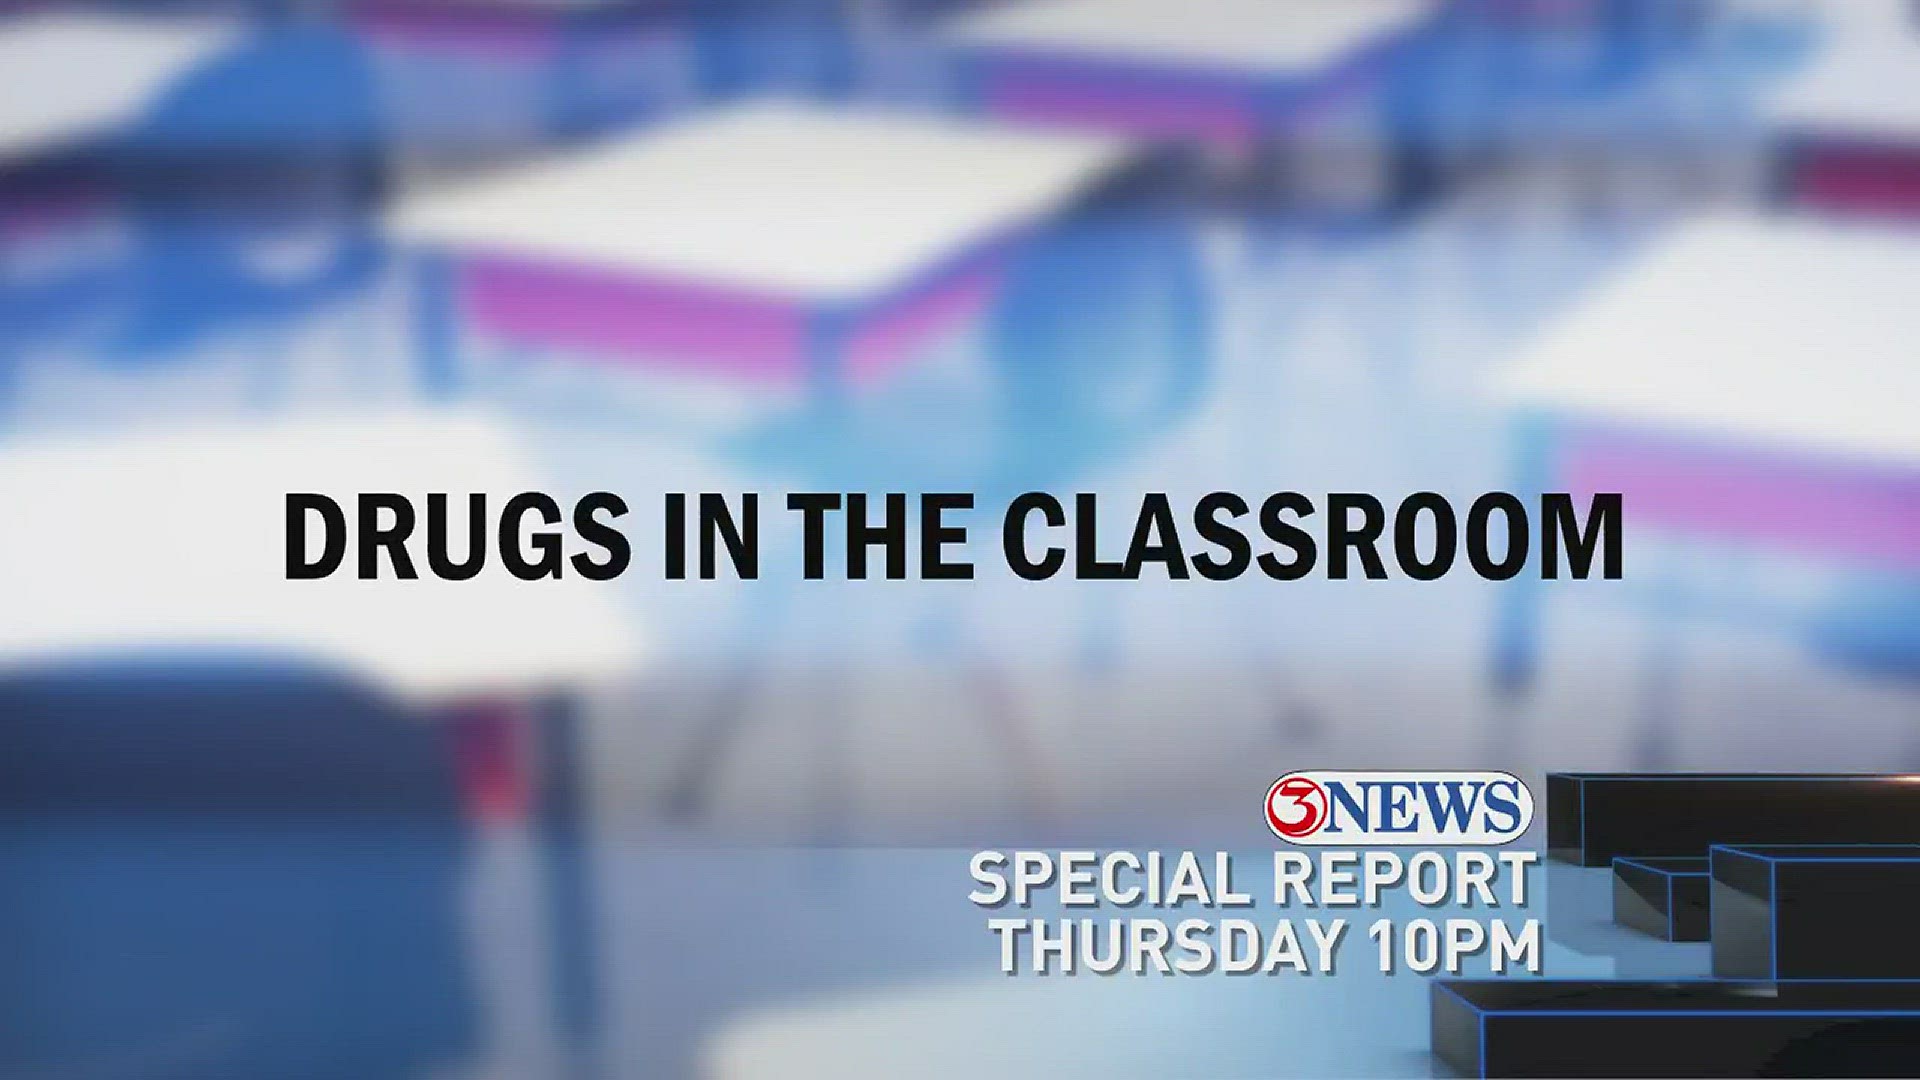 Drugs in the classroom -- it's commonplace and a real problem here in South Texas. CCISD is fighting the problem with special forces. Even though they may not stop off-campus drug use, having specially trained dogs roaming the hallways sends a clear messa